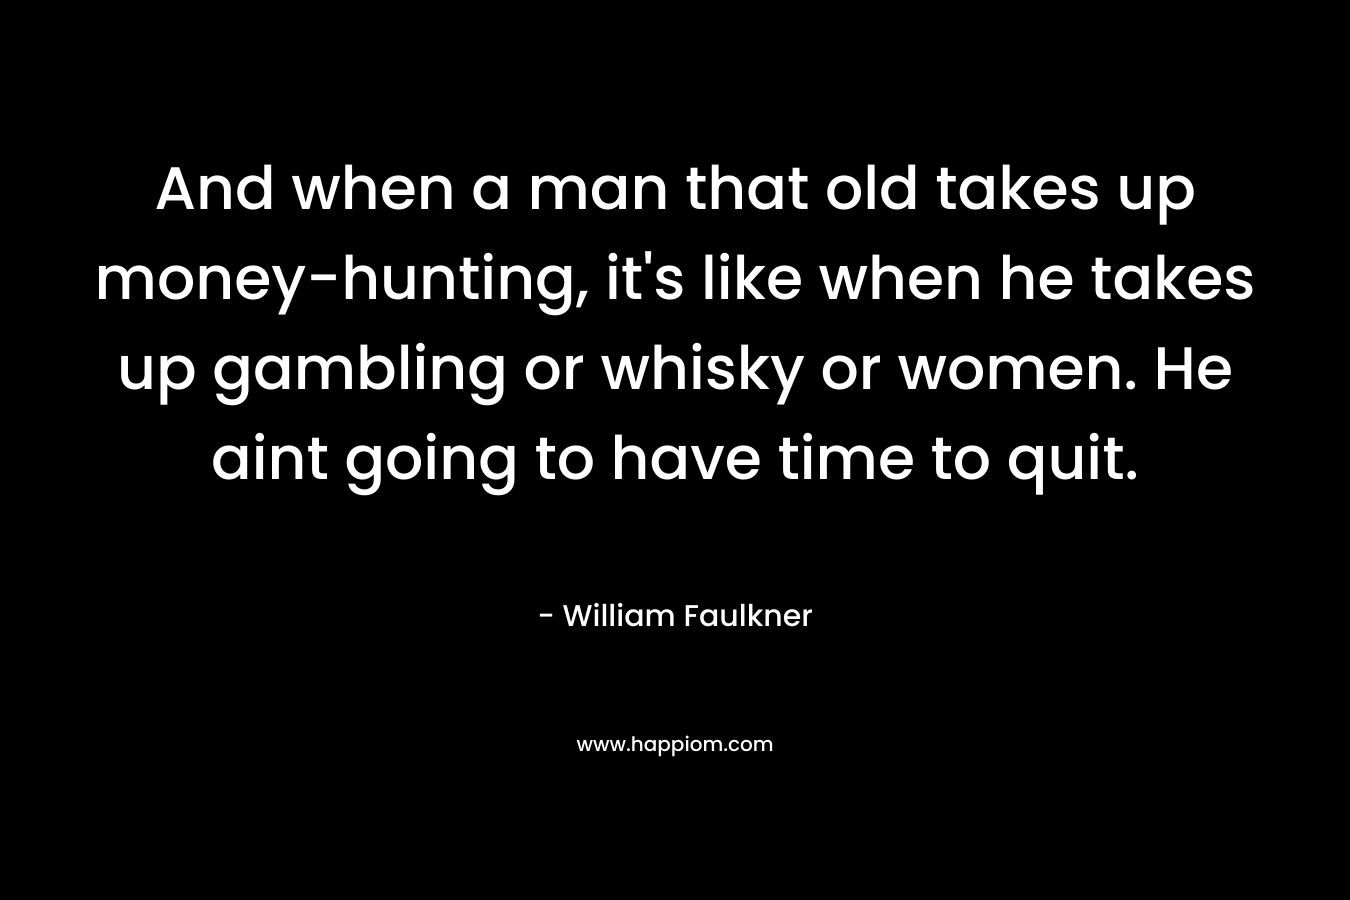 And when a man that old takes up money-hunting, it’s like when he takes up gambling or whisky or women. He aint going to have time to quit. – William Faulkner